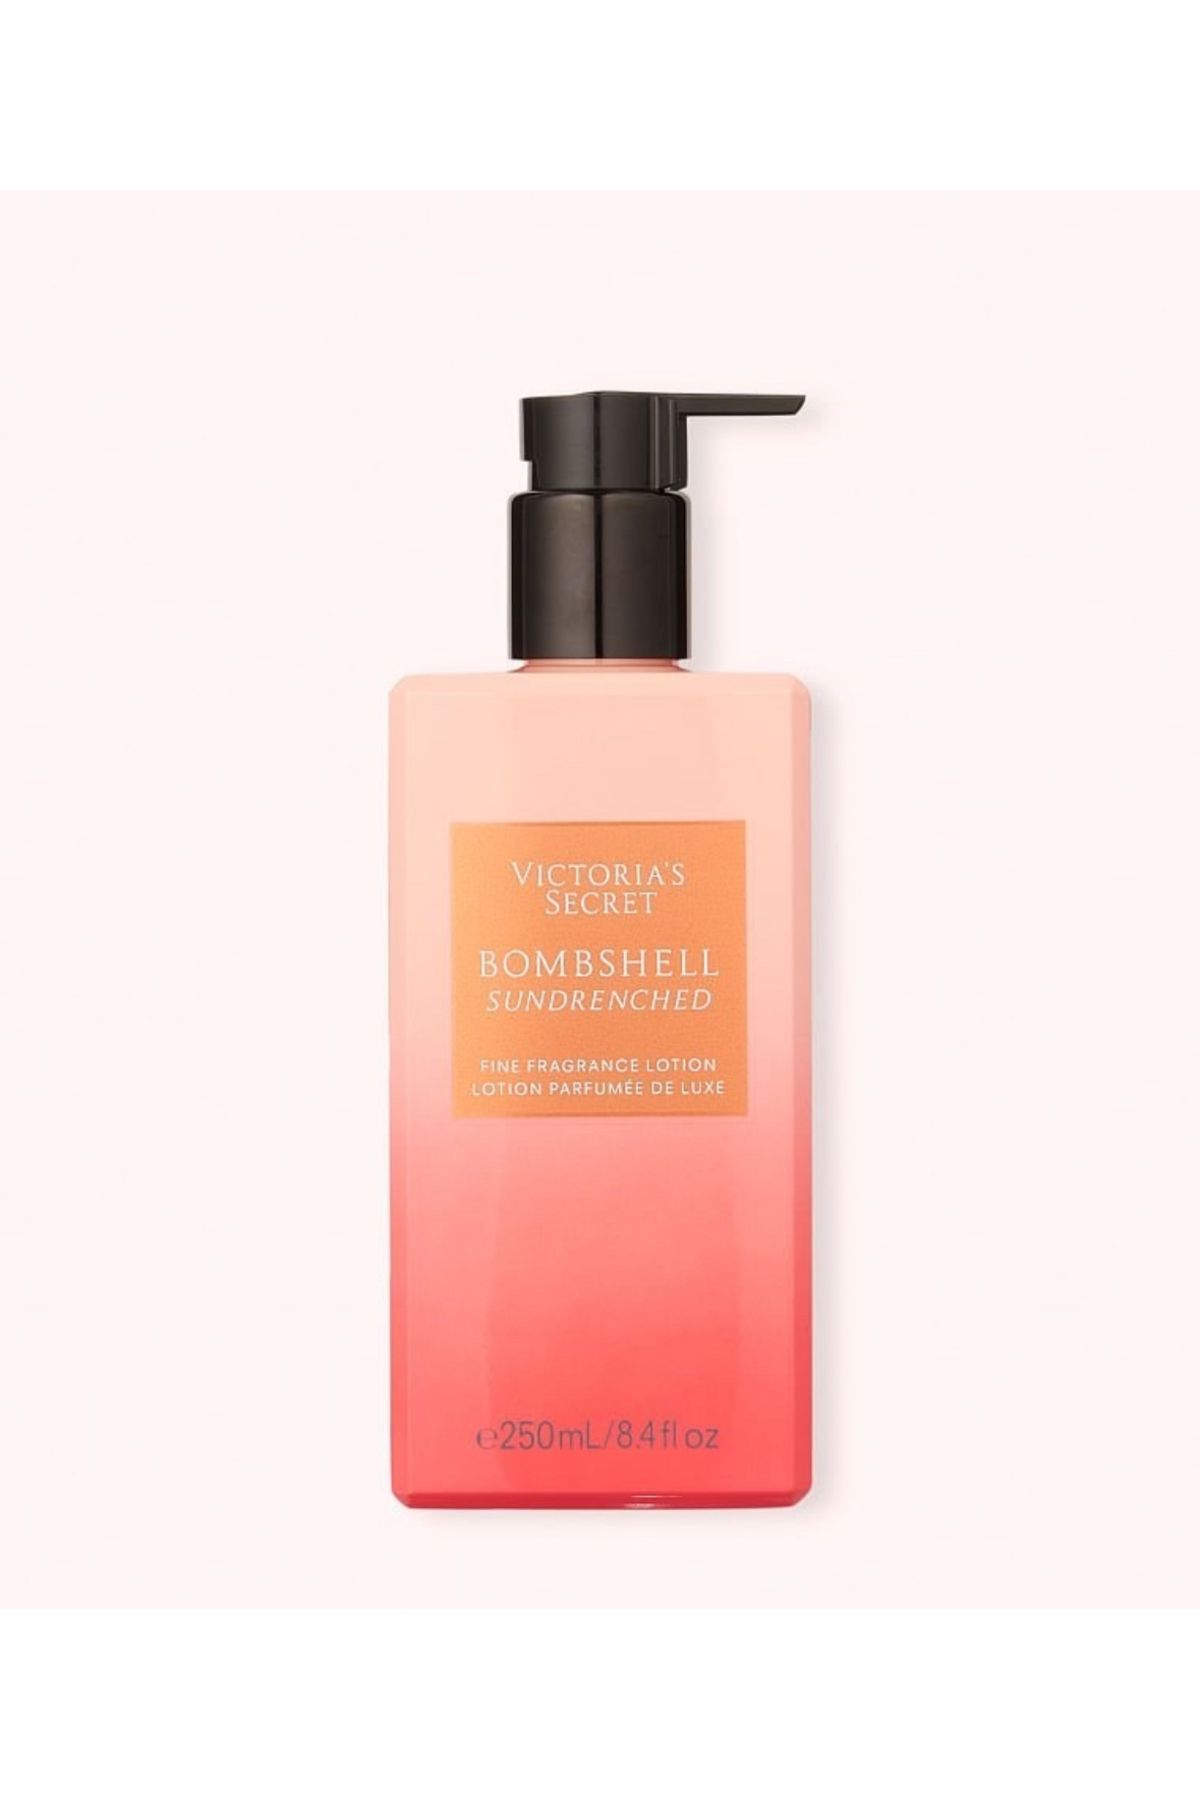 Victoria's Secret BOMBSHELL SUNDRENCHED